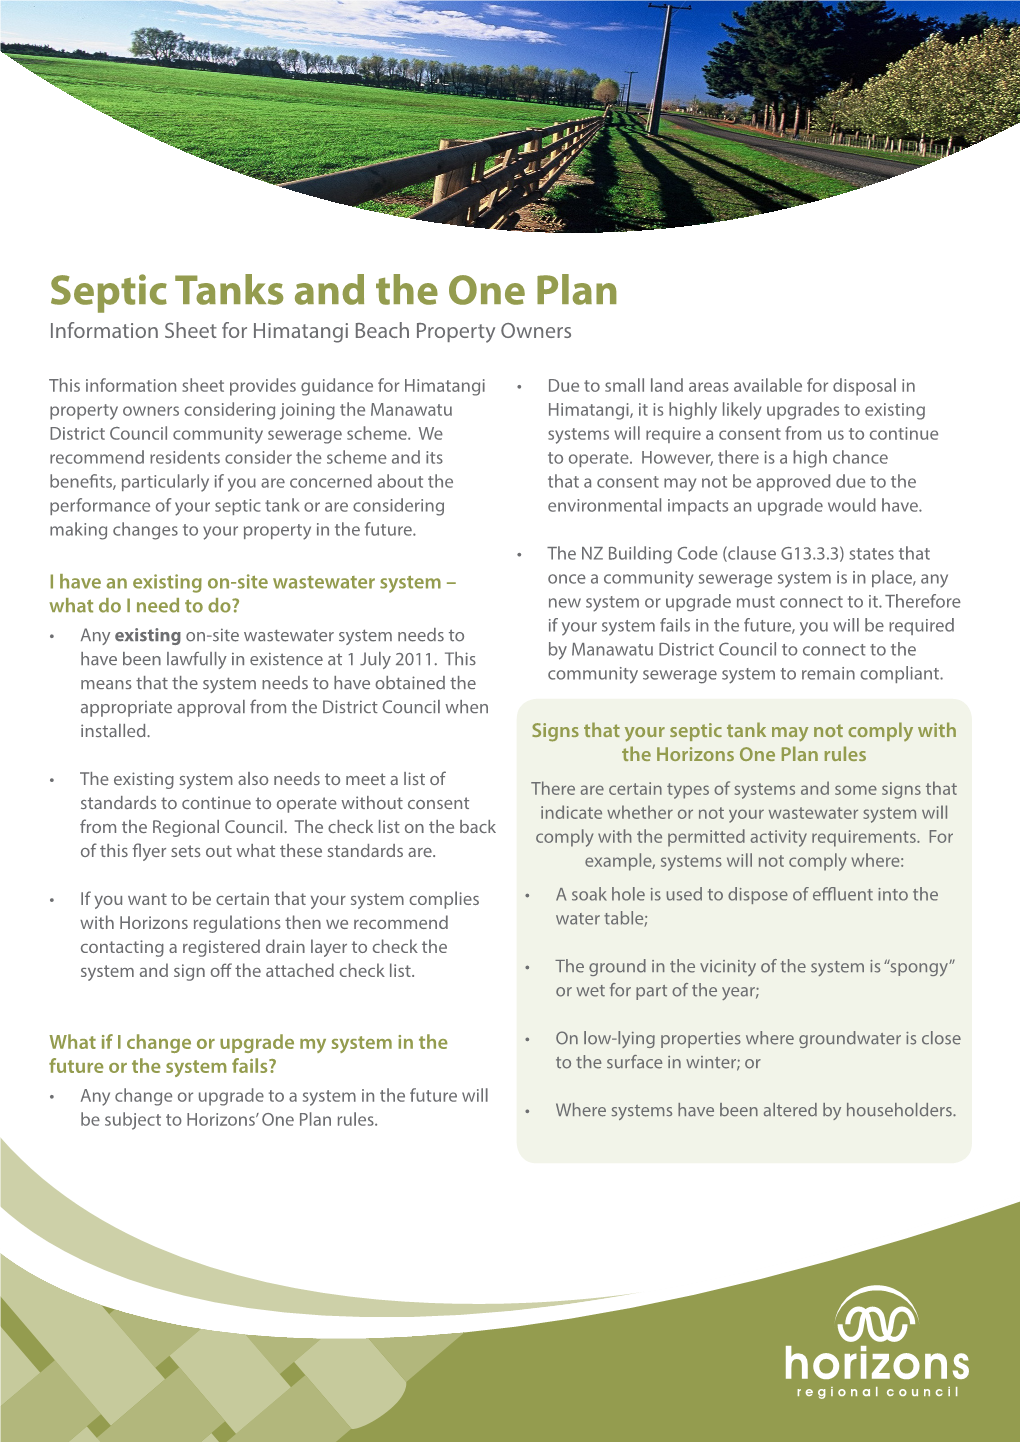 Septic Tanks and the One Plan Information Sheet for Himatangi Beach Property Owners